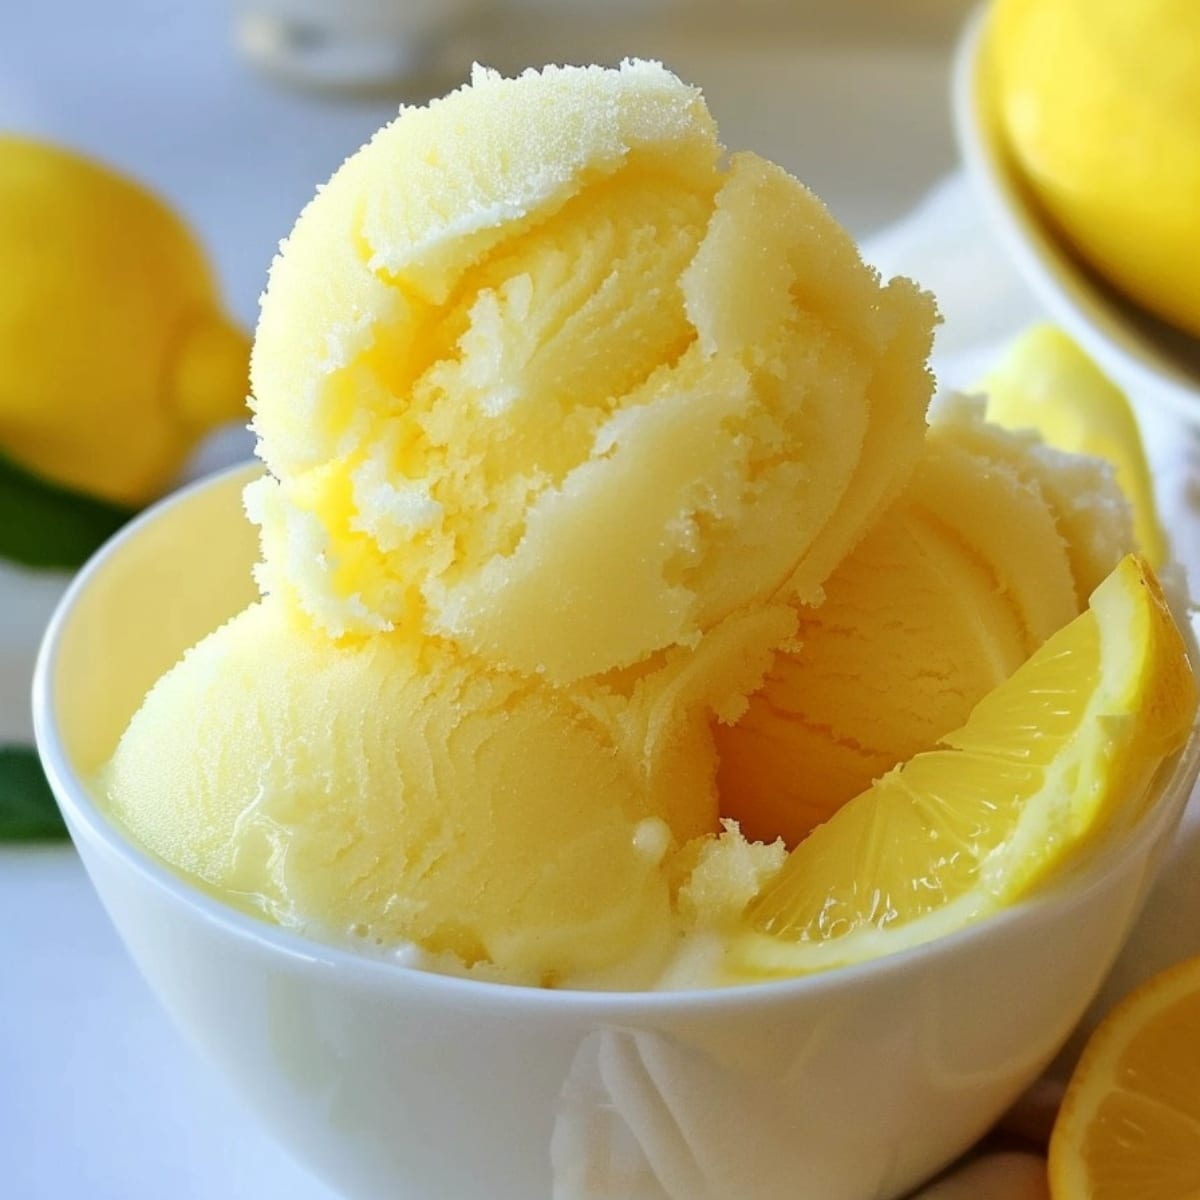 Scoops of lemon sorbet in a white bowl garnished with lemon wedge.